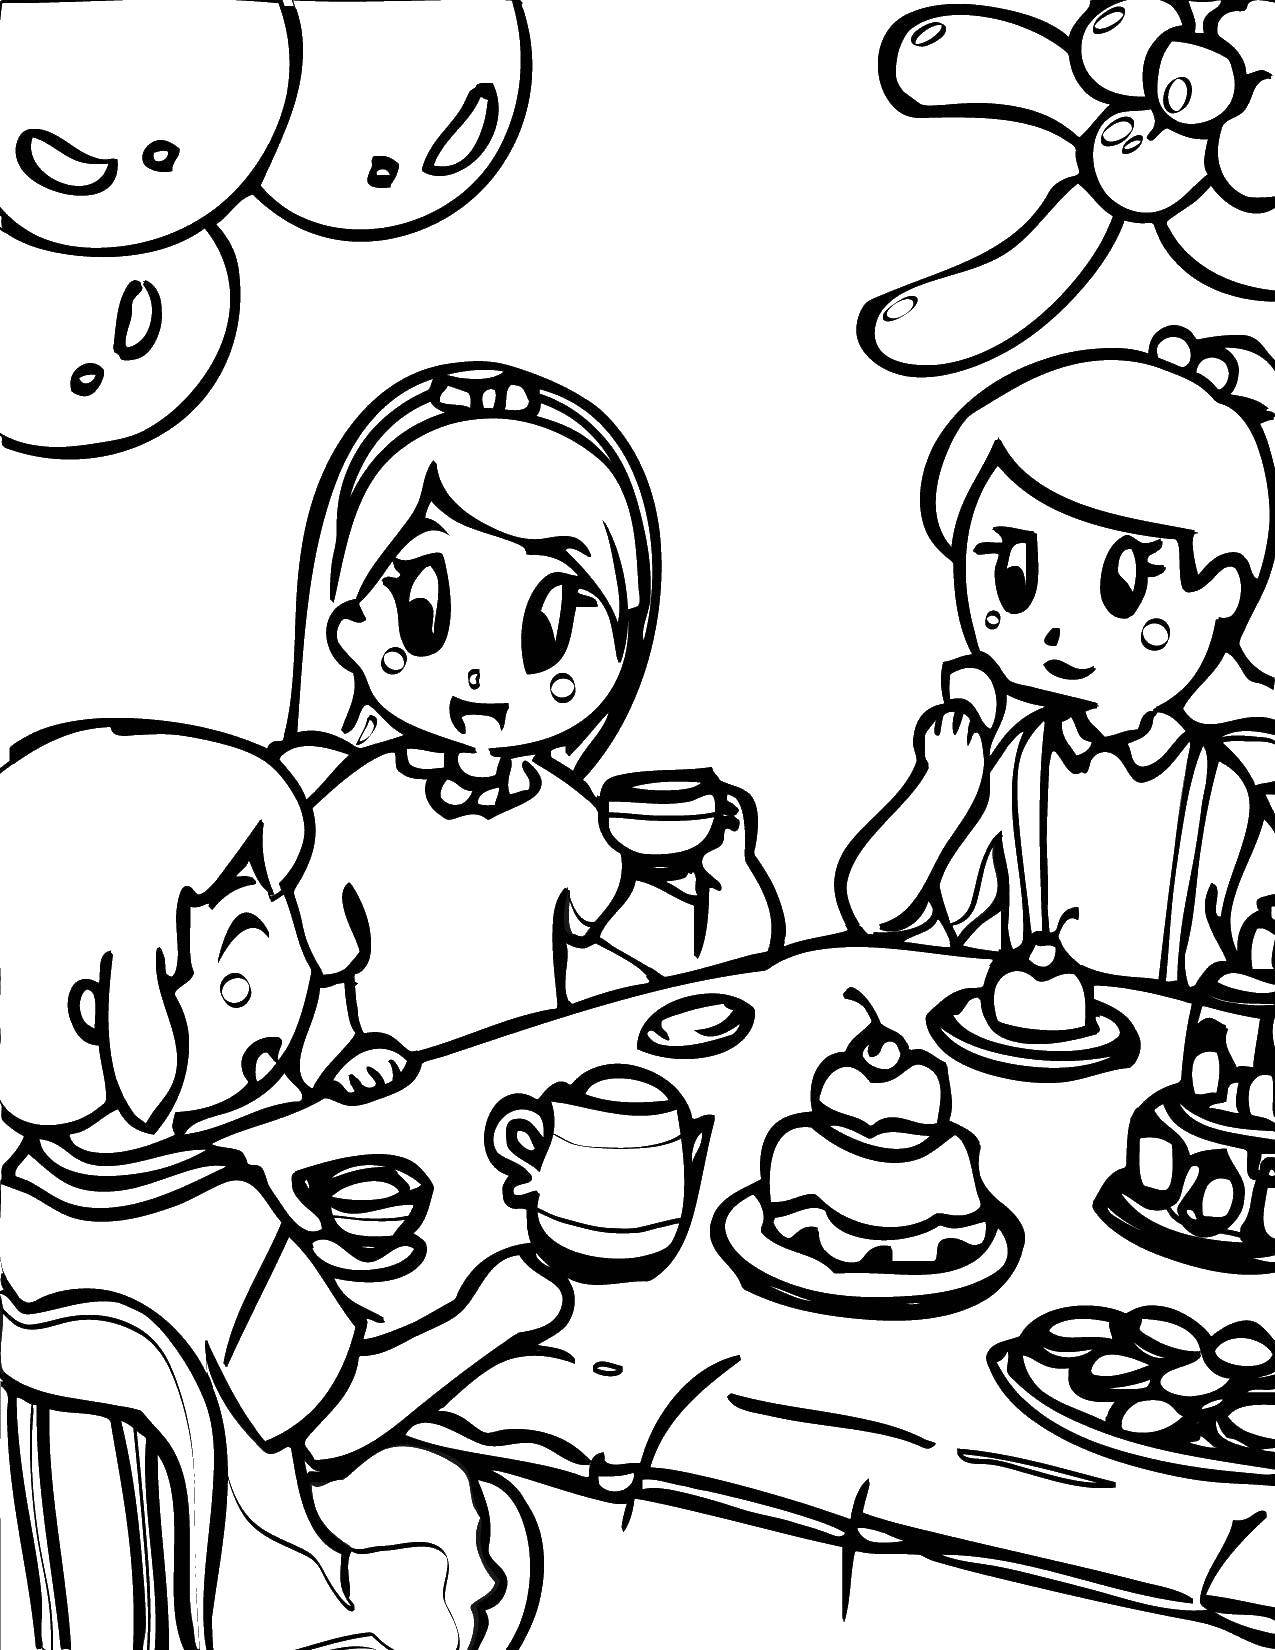 Coloring Girly gatherings. Category coloring. Tags:  Cake, food, holiday.